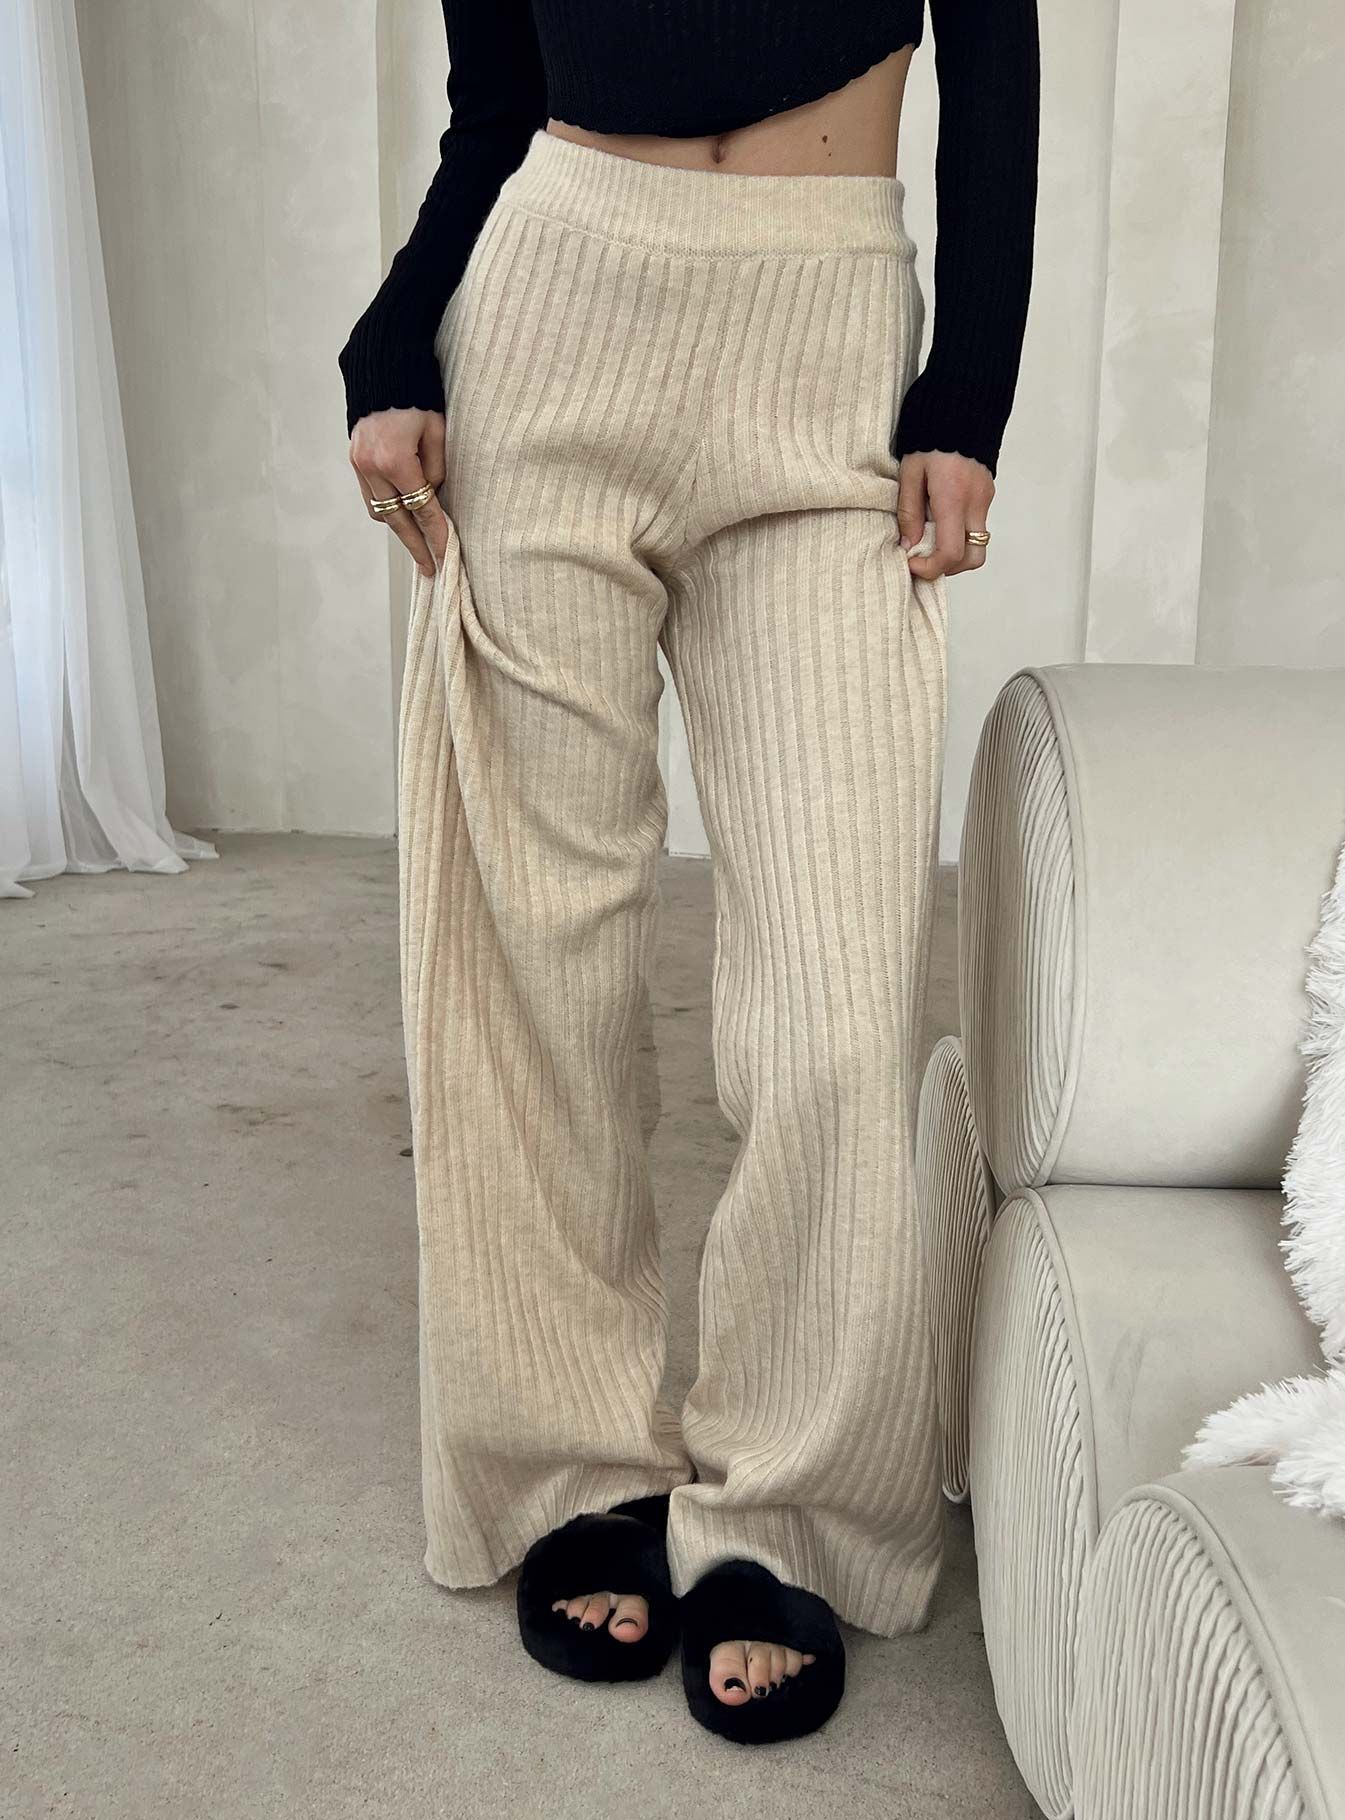 How to Style Knit Pants: Top 15 Cozy & Attractive Outfit Ideas for Women